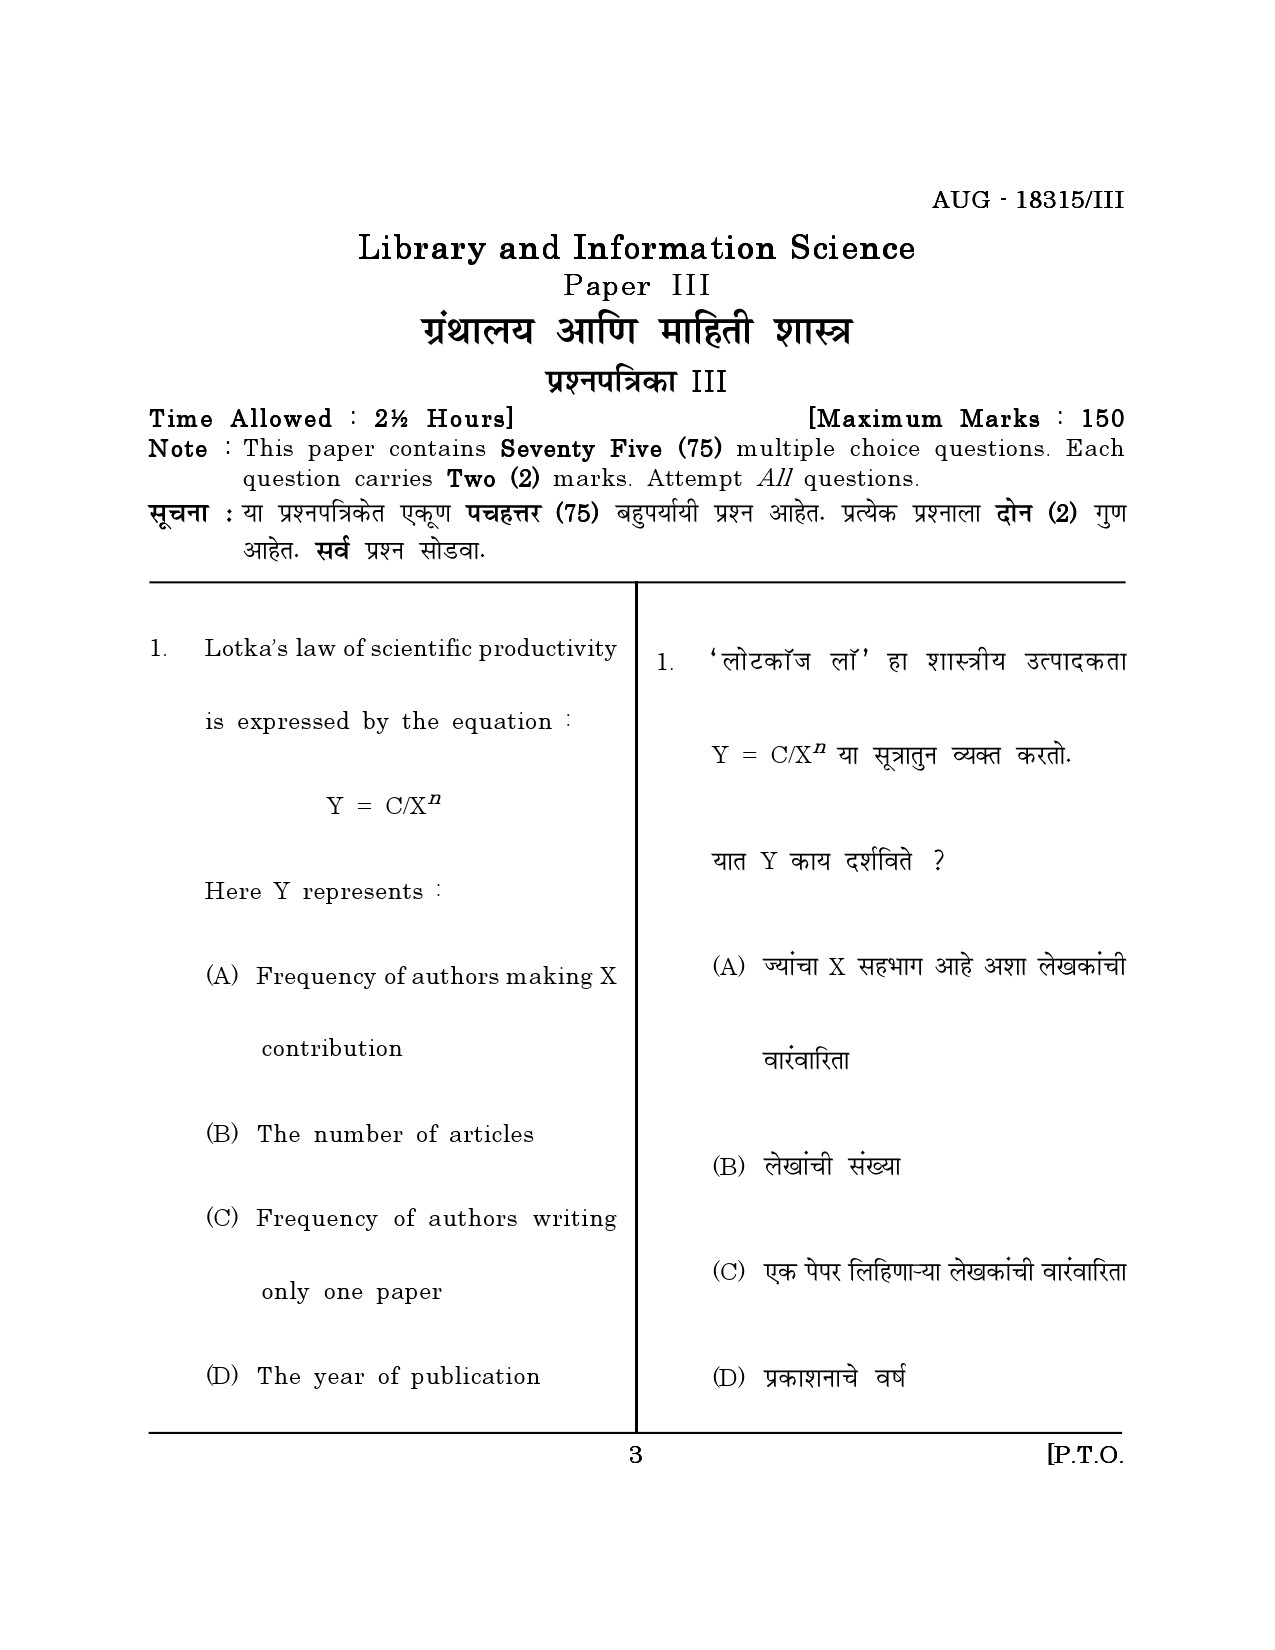 Maharashtra SET Library Information Science Question Paper III August 2015 2